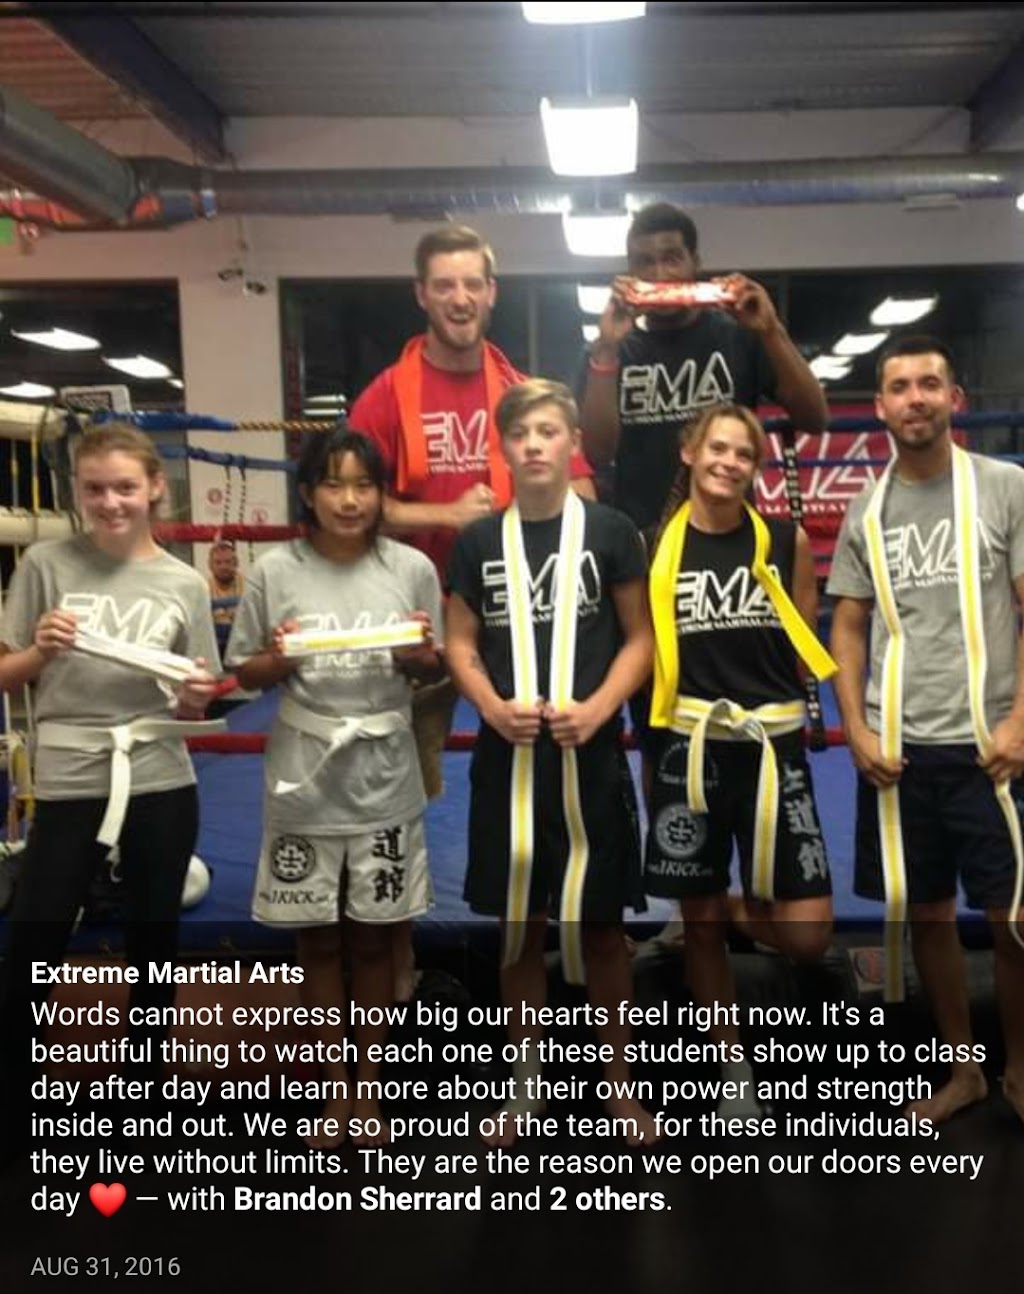 Extreme Martial Arts | 2300 S Cline Ave #103, Schererville, IN 46375 | Phone: (219) 915-0872